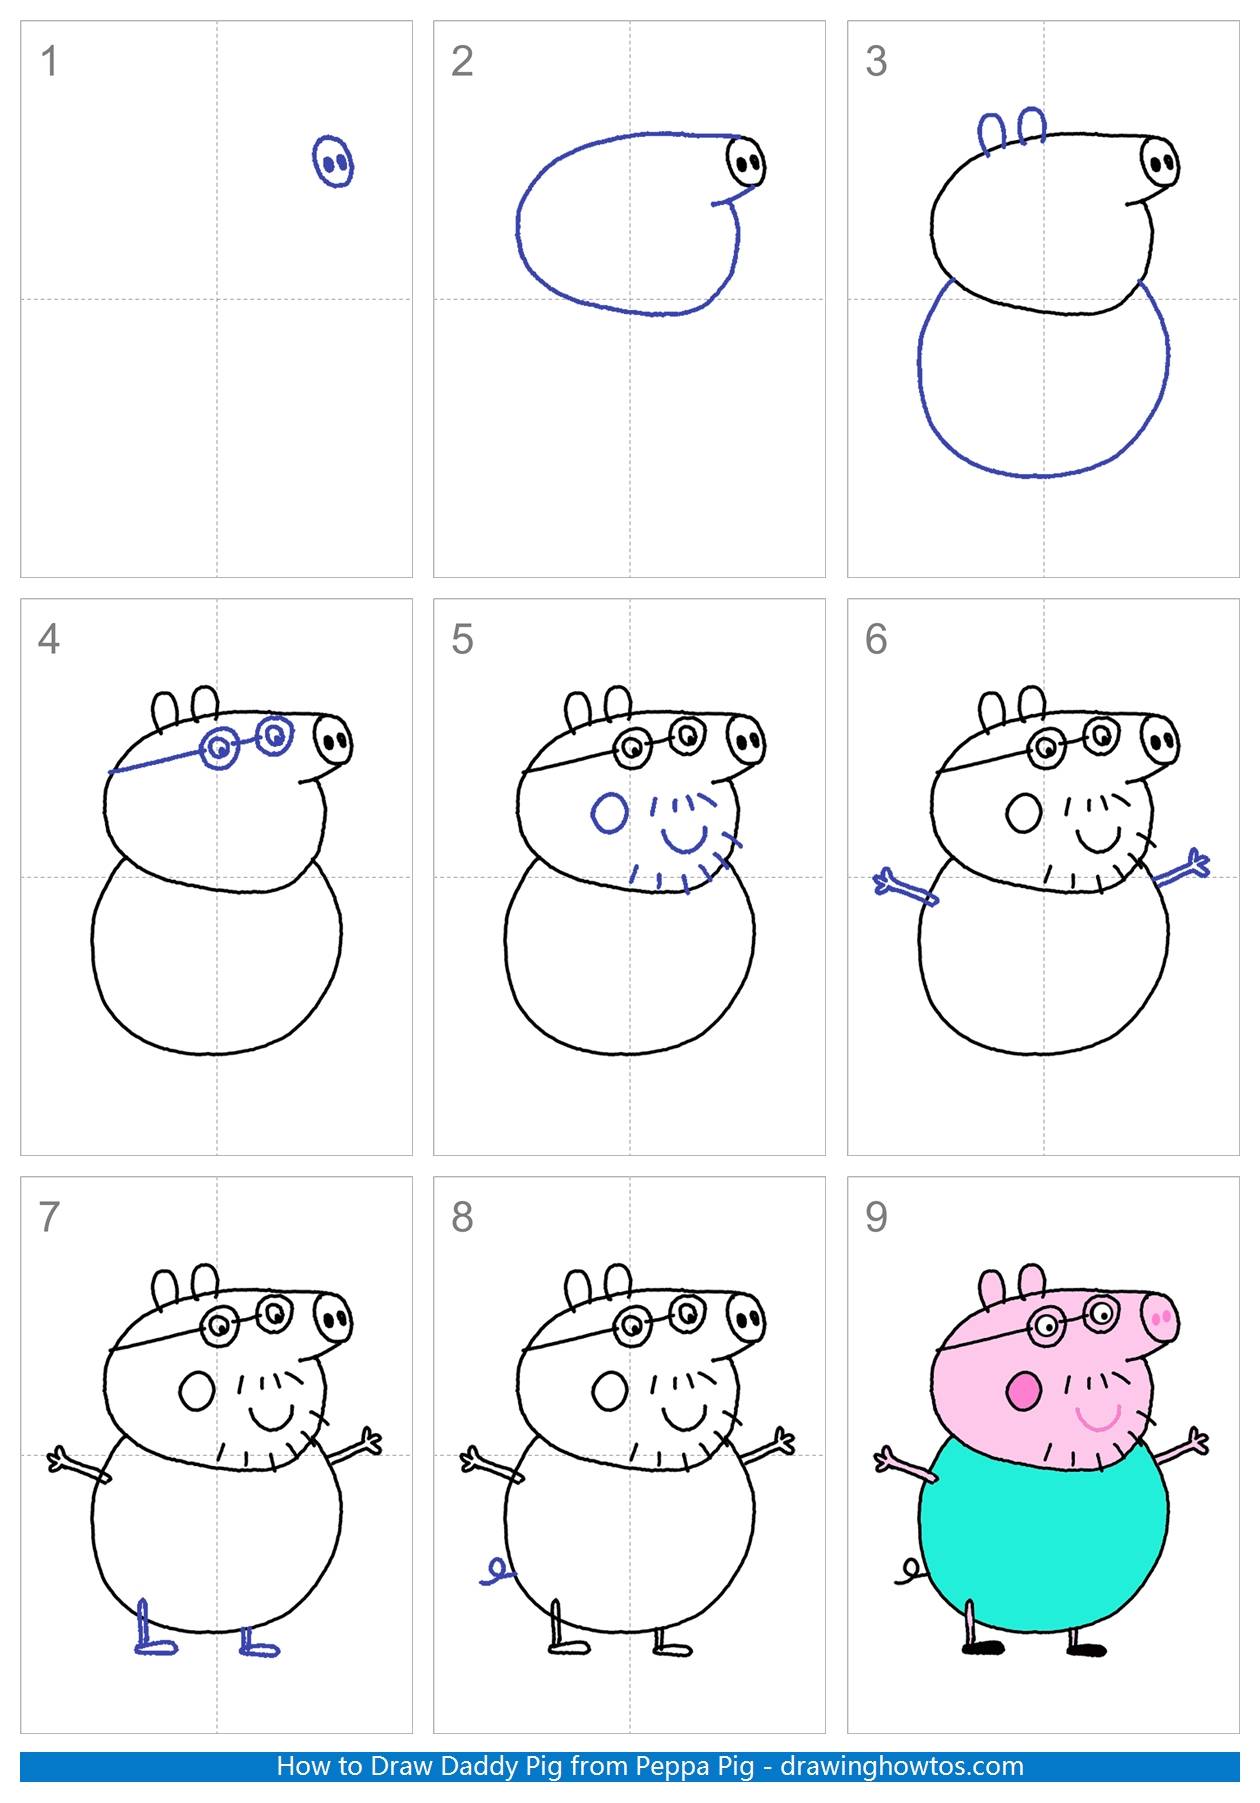 How to Draw Daddy Pig Step by Step